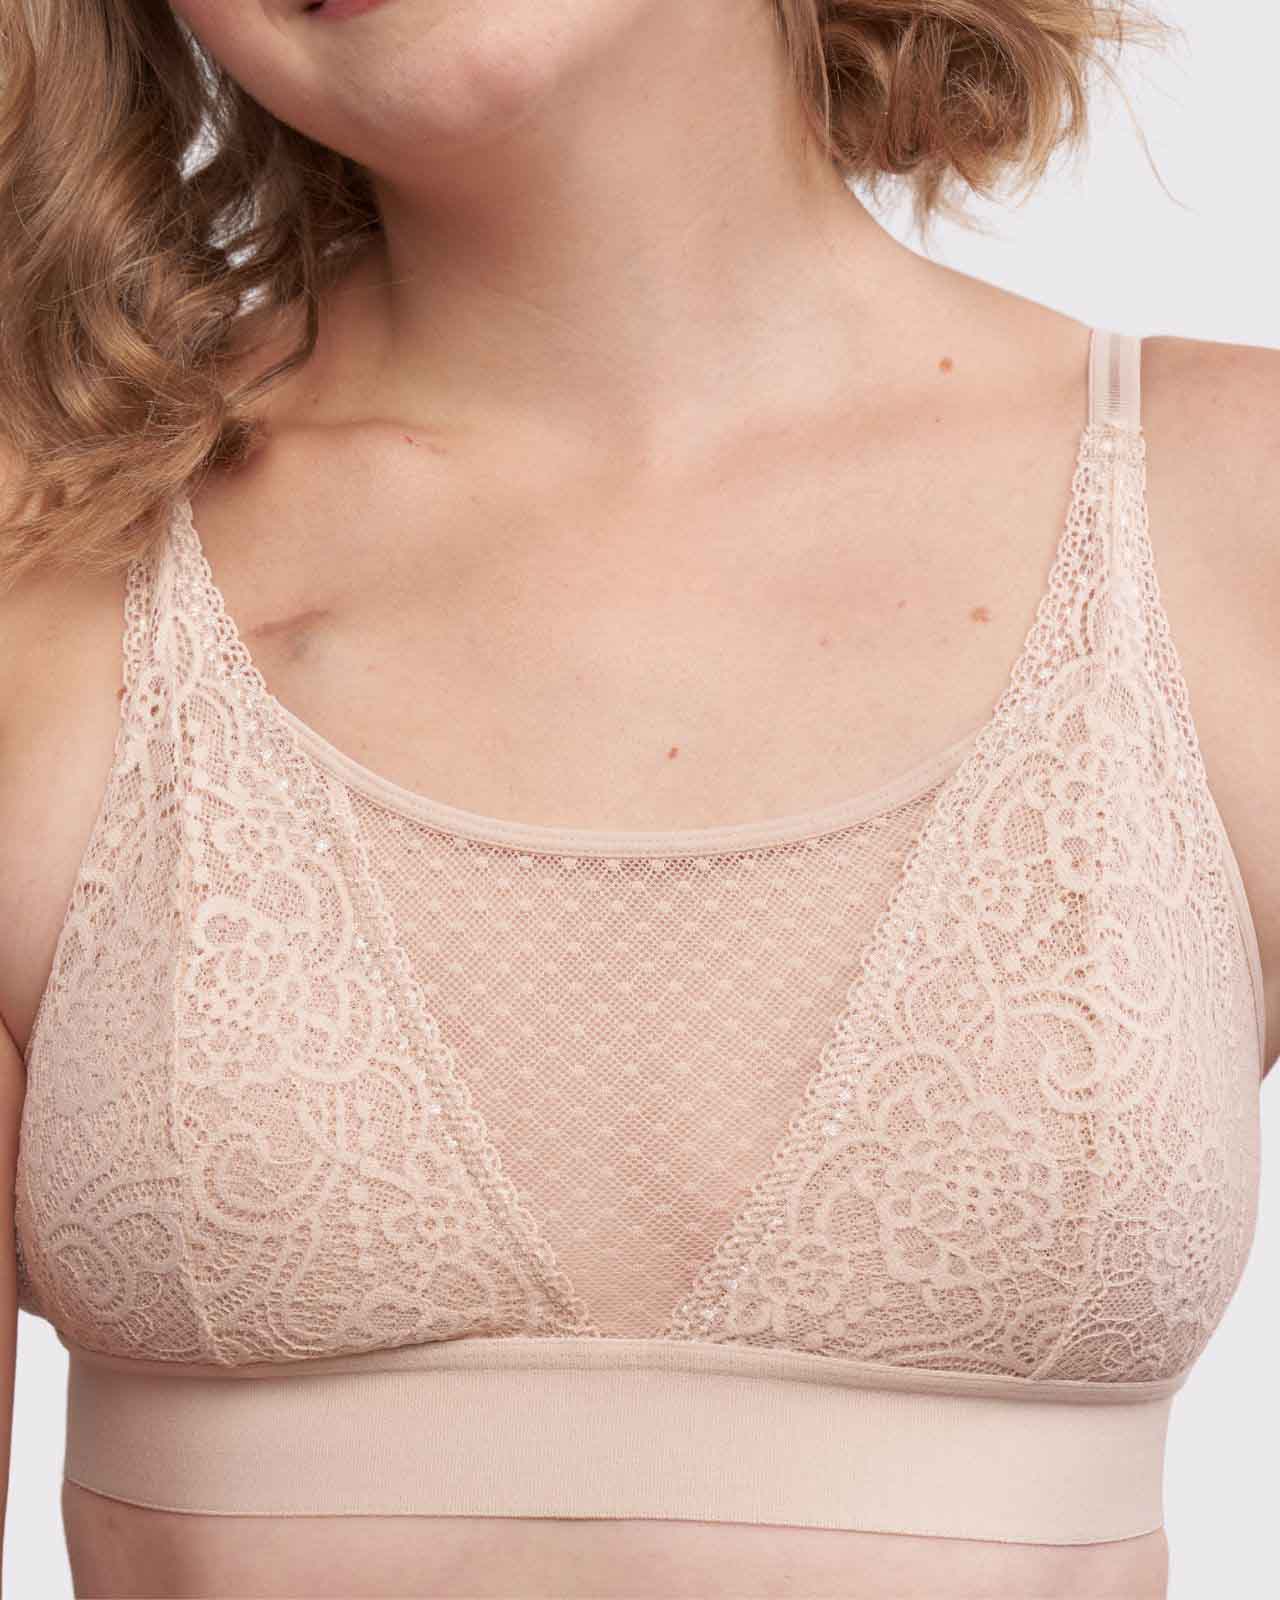 Anaono Women's Maggie Sexy Post-mastectomy Lace Bralette Champagne - Medium  : Target